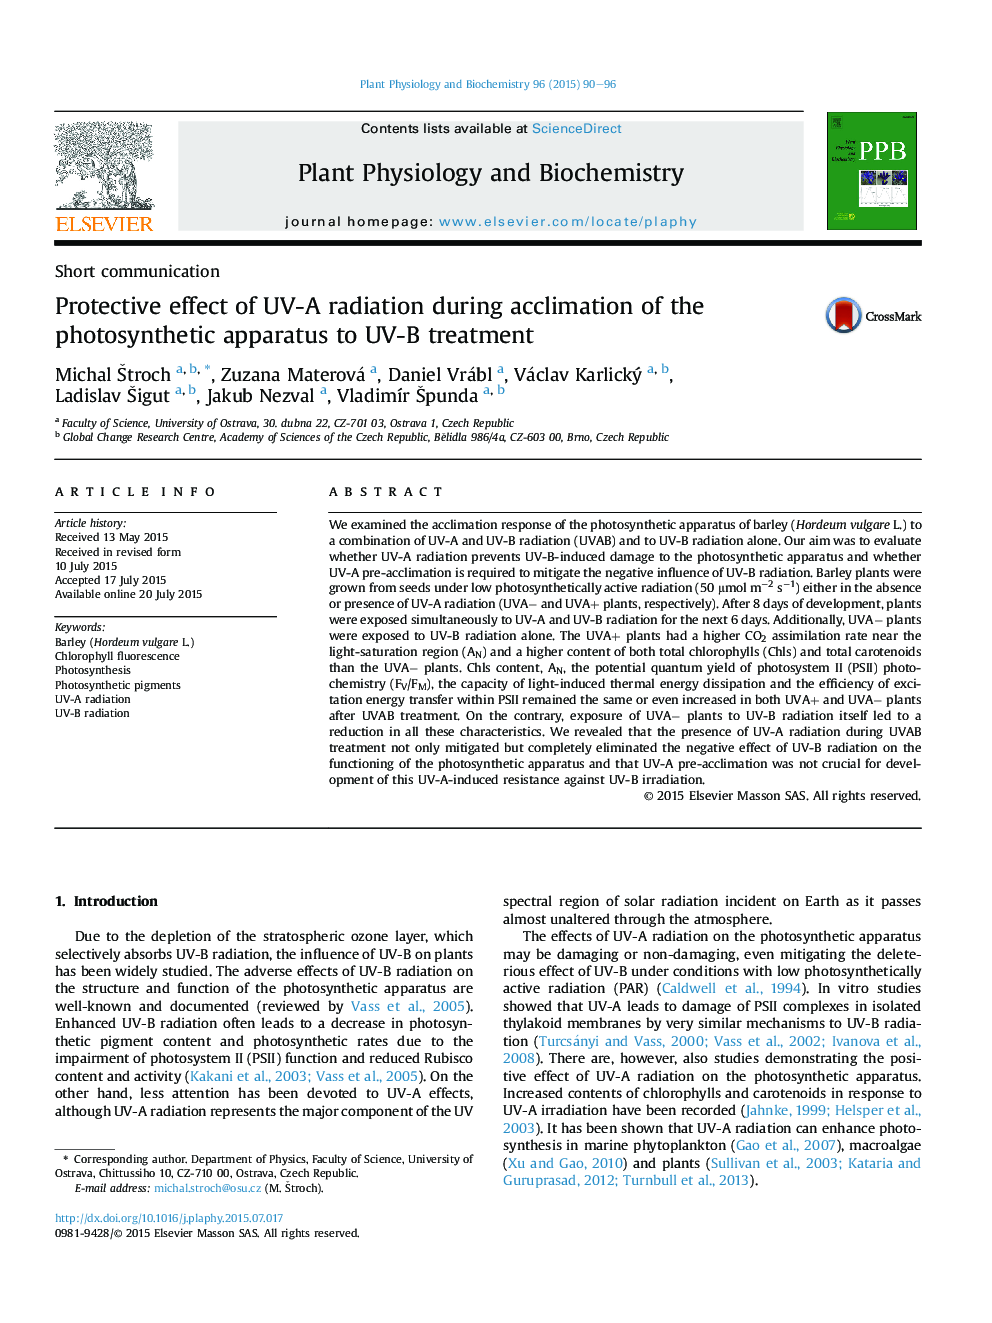 Protective effect of UV-A radiation during acclimation of the photosynthetic apparatus to UV-B treatment